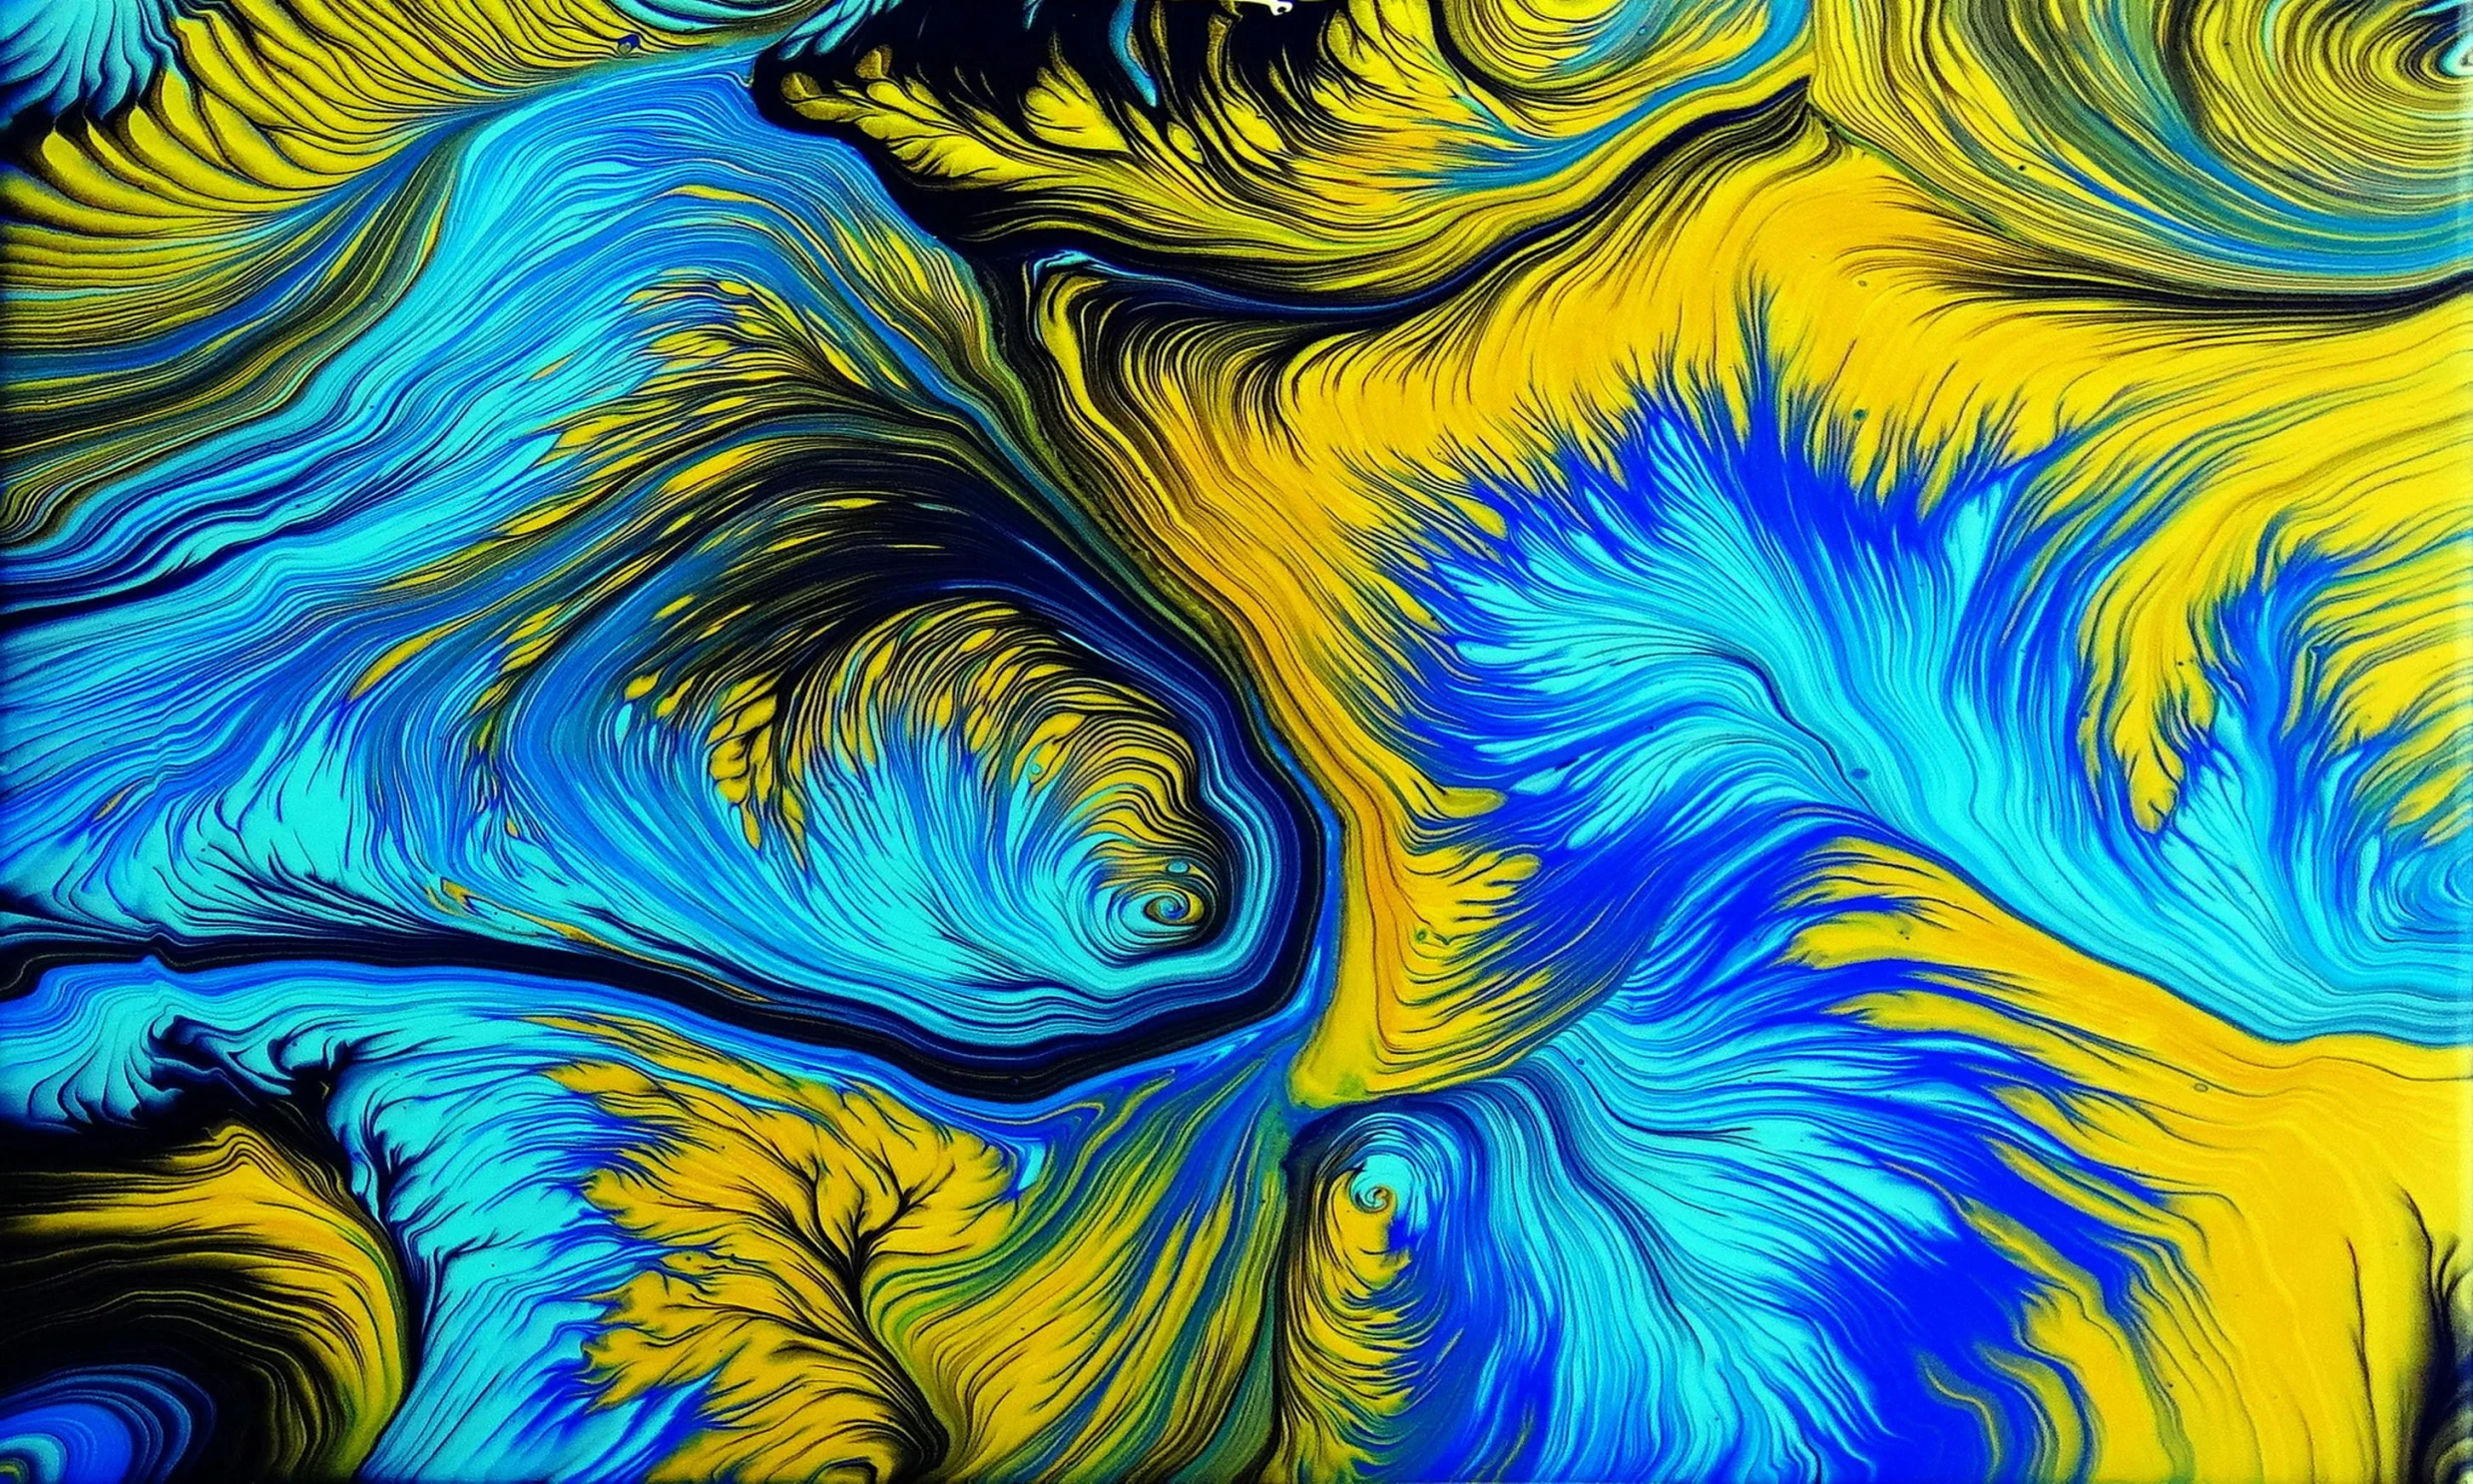 a painting of blue and yellow swirls on a black background, an ultrafine detailed painting, inspired by Vincent Di Fate, pexels, generative art, extreme detail 4 k, ferrofluid oceans, houdini algorithm generative art, lsd feathers